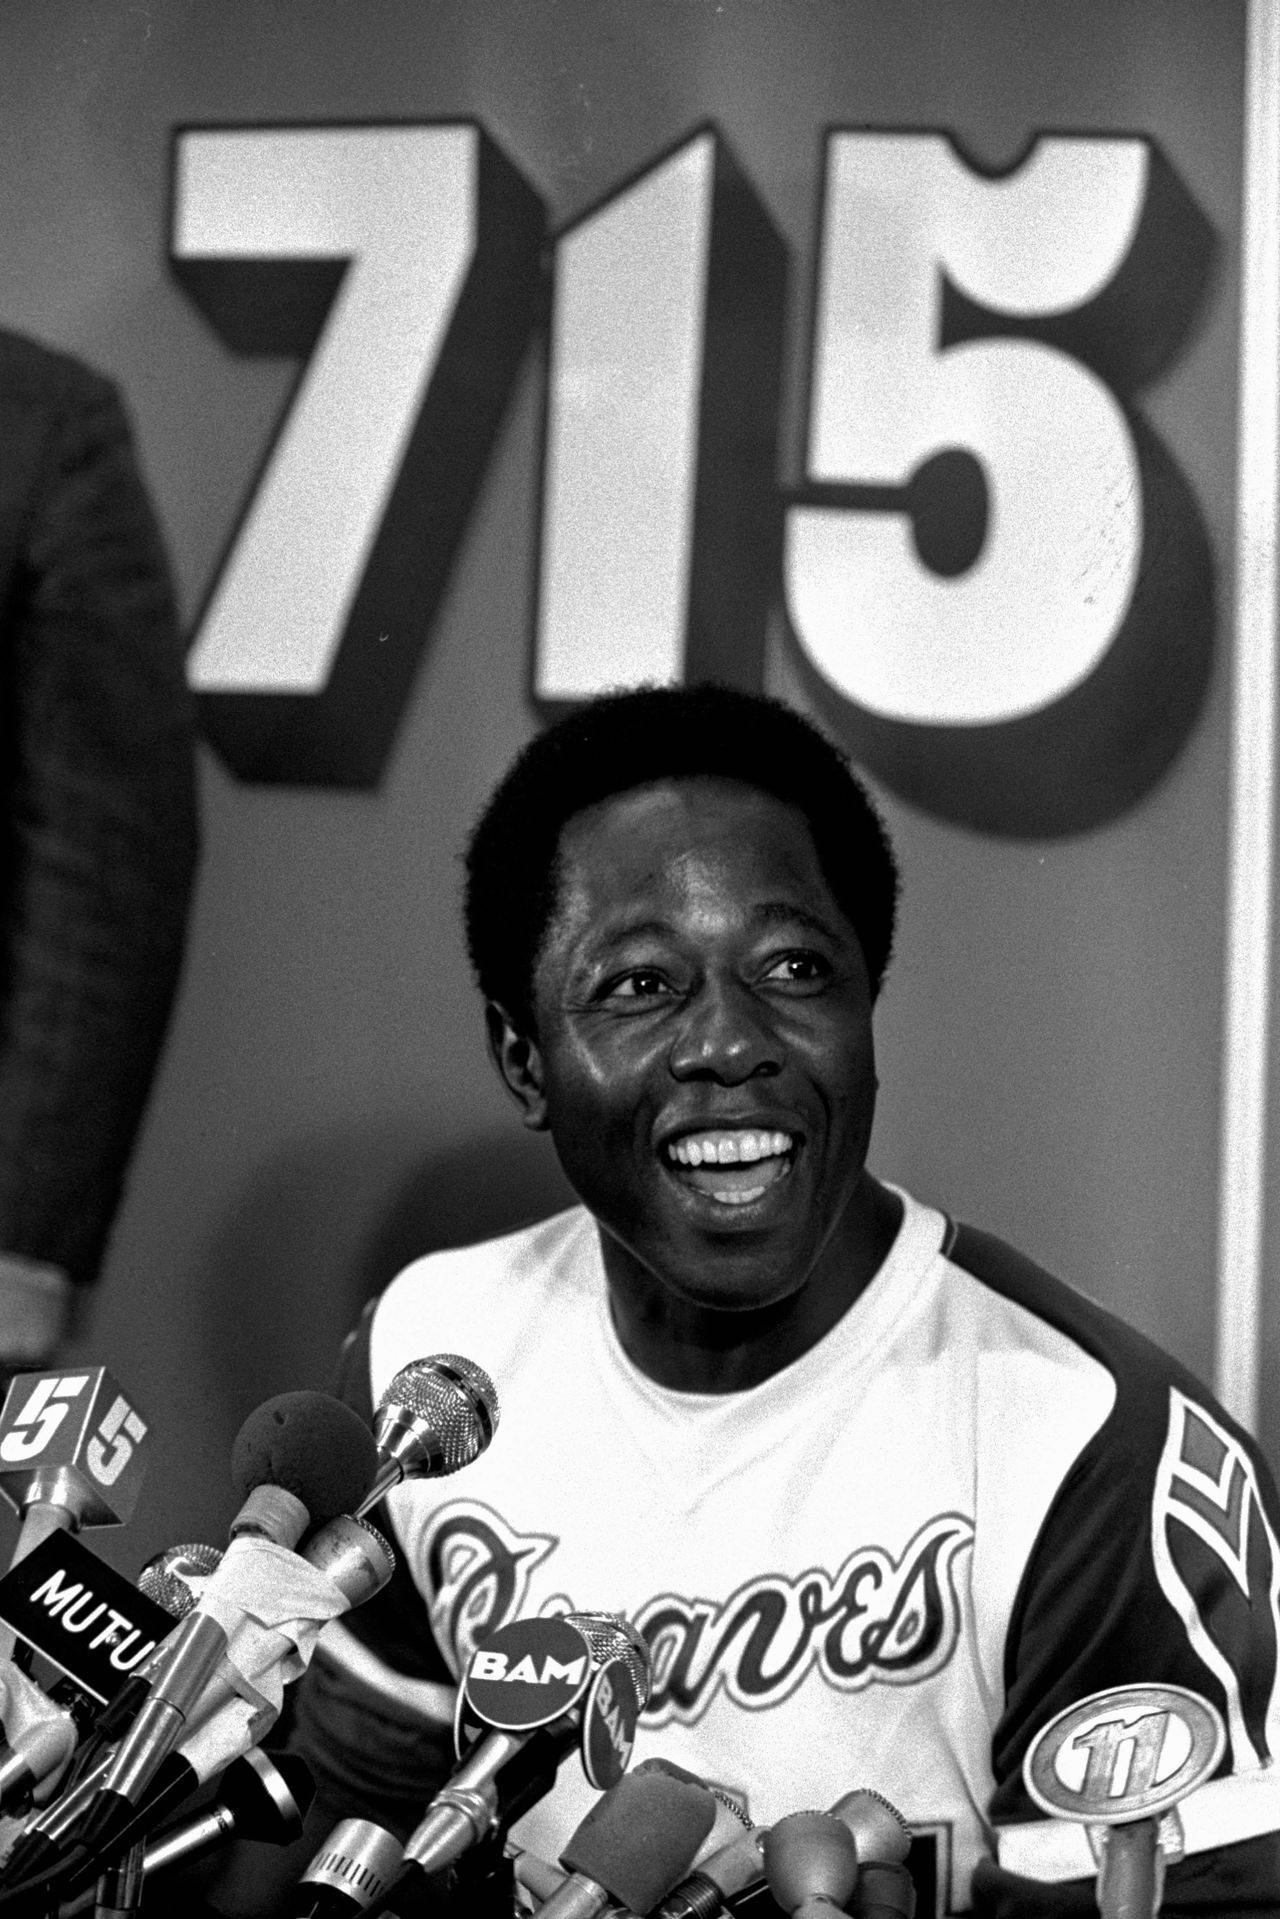 Hank Aaron 715th Victory Press Conference Background